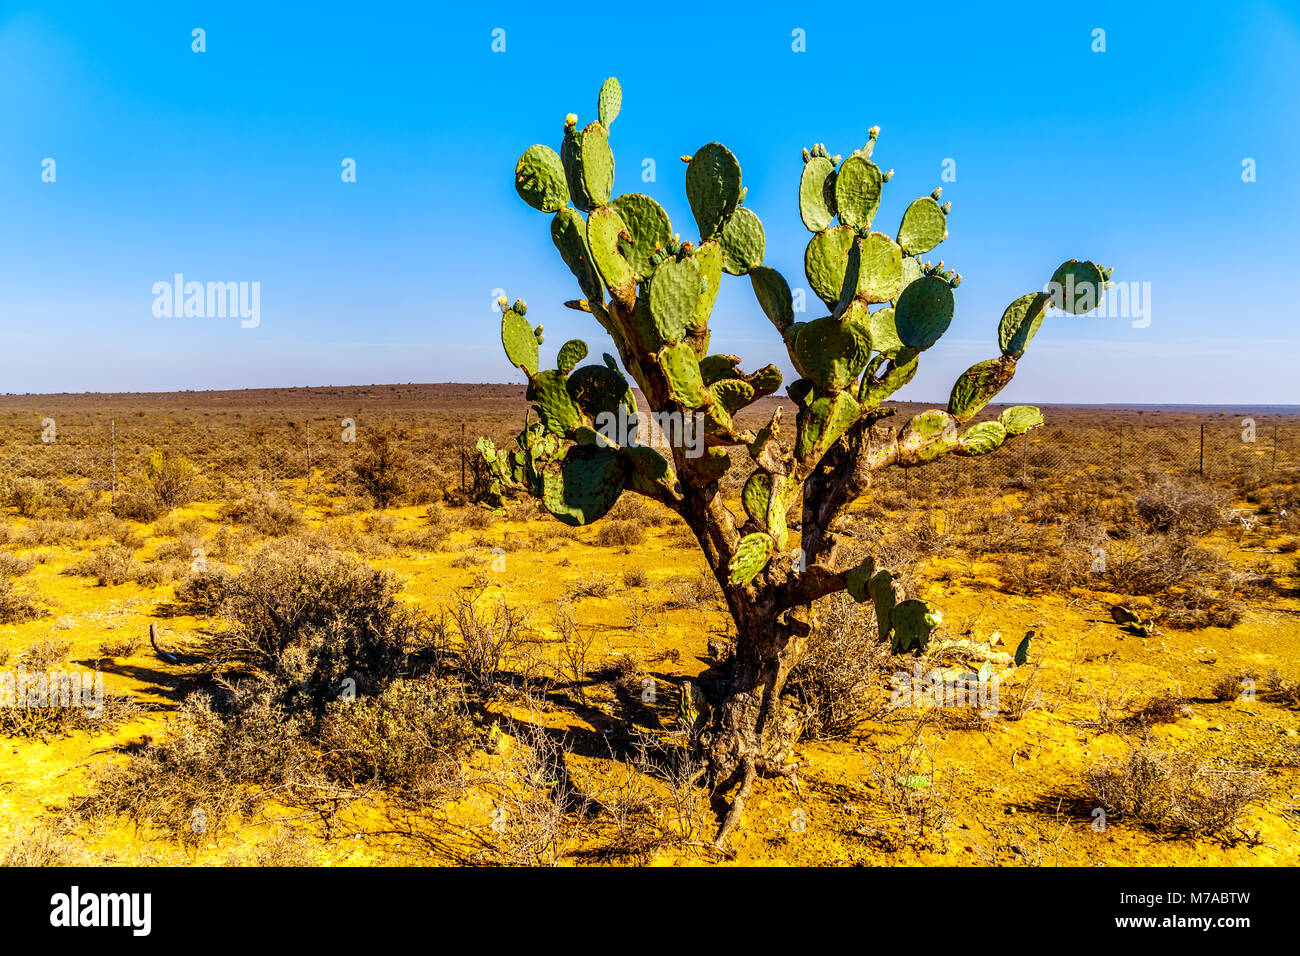 Old Prickly Pear Cactus in the semi desert Karoo Region of South Africa Stock Photo